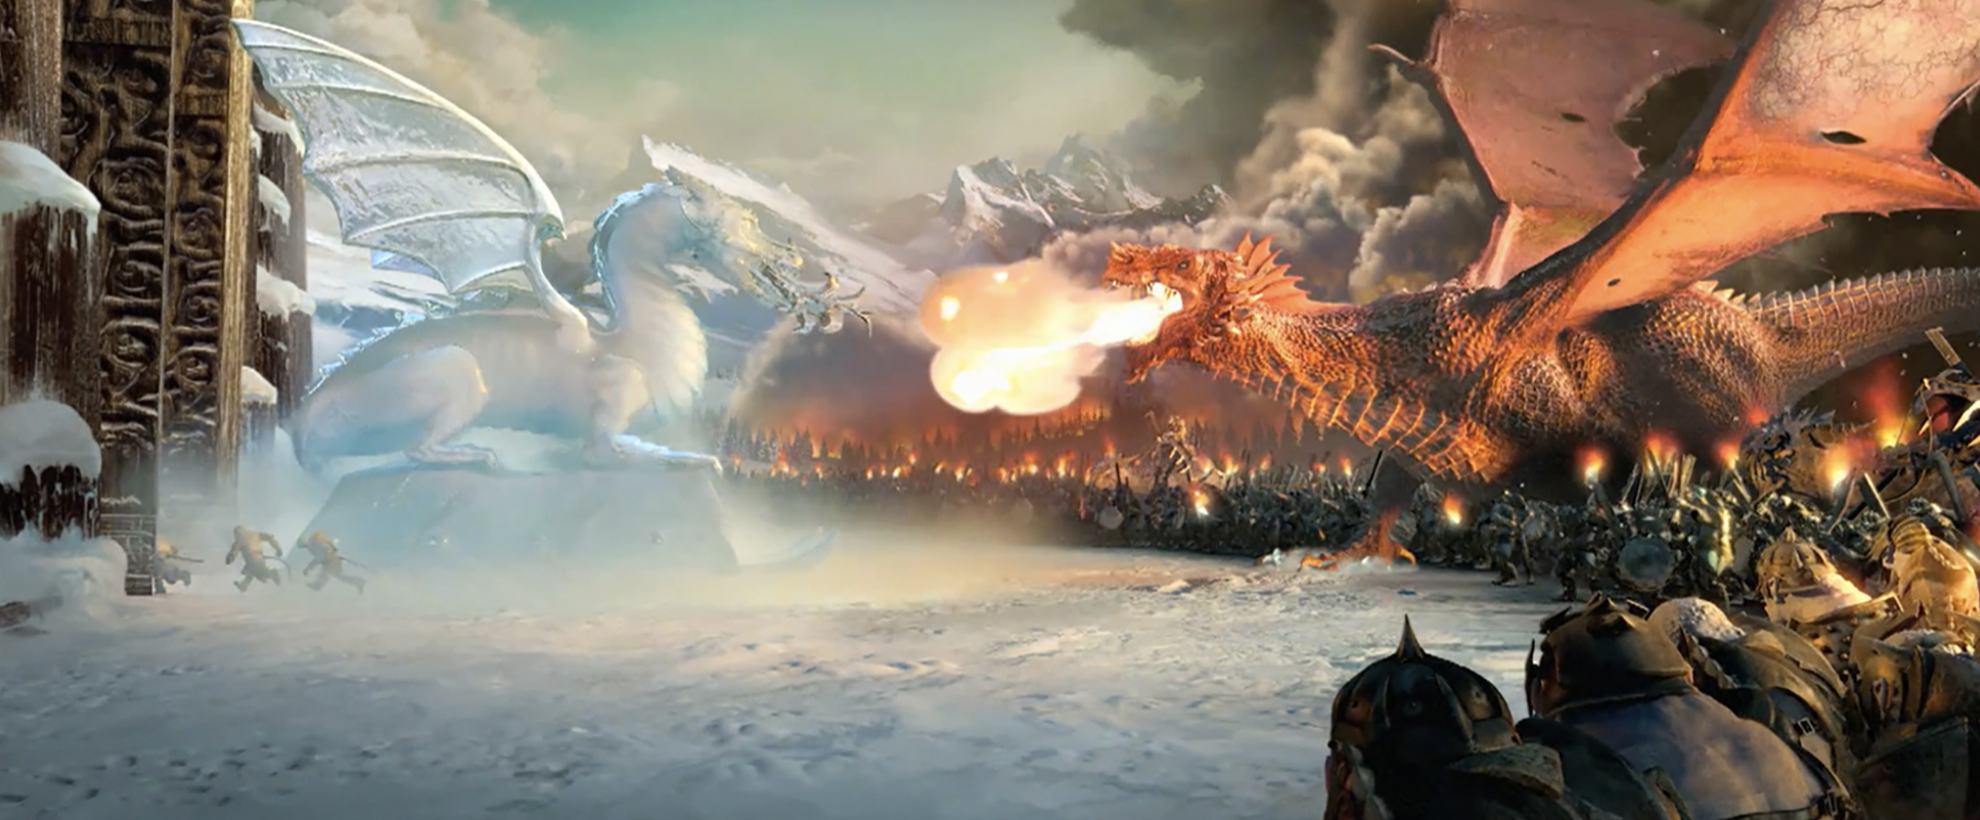 Two dragons, an ice dragon and a fire dragon, fight 